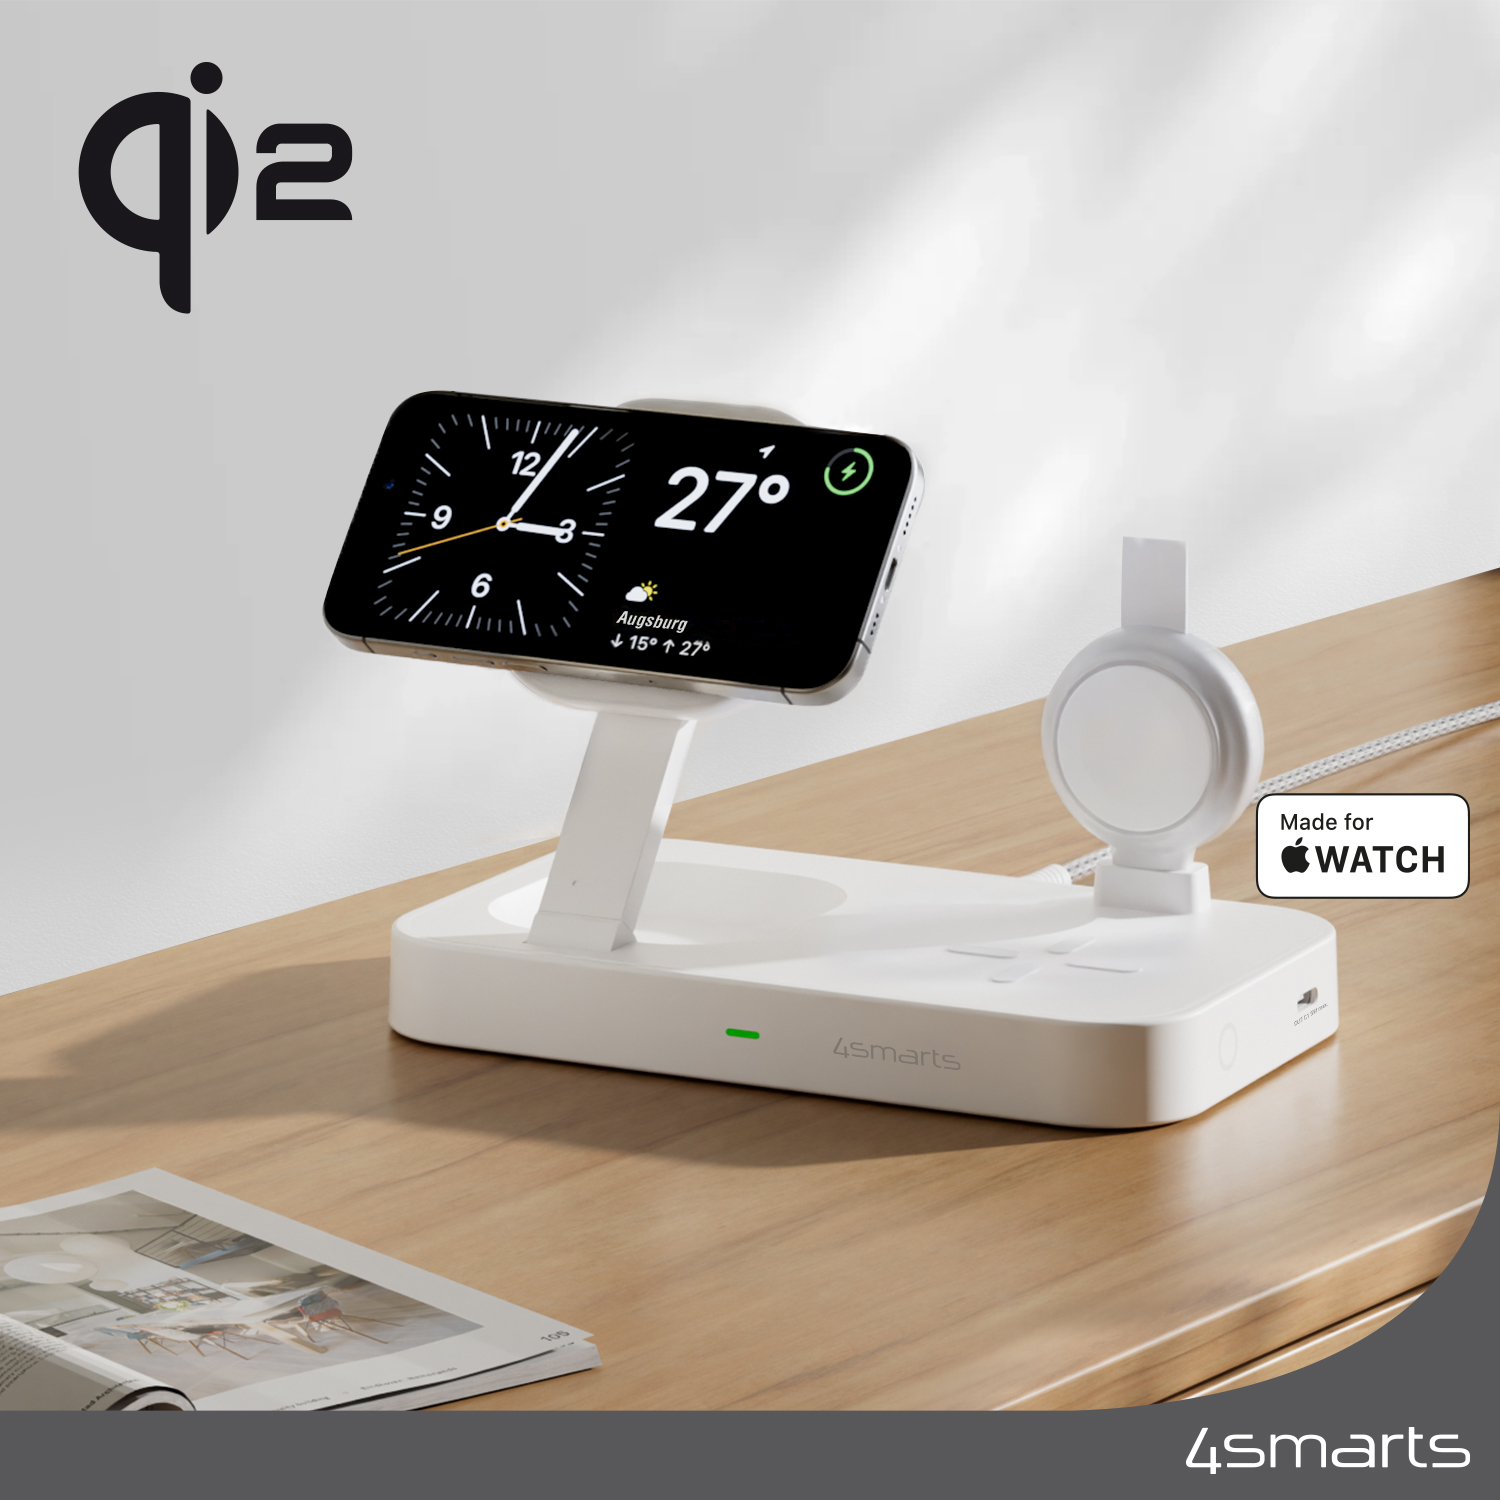 The 3-in-1 Qi2 Wireless Charger Station from 4smarts looks good in any room and is a real eye-catcher.